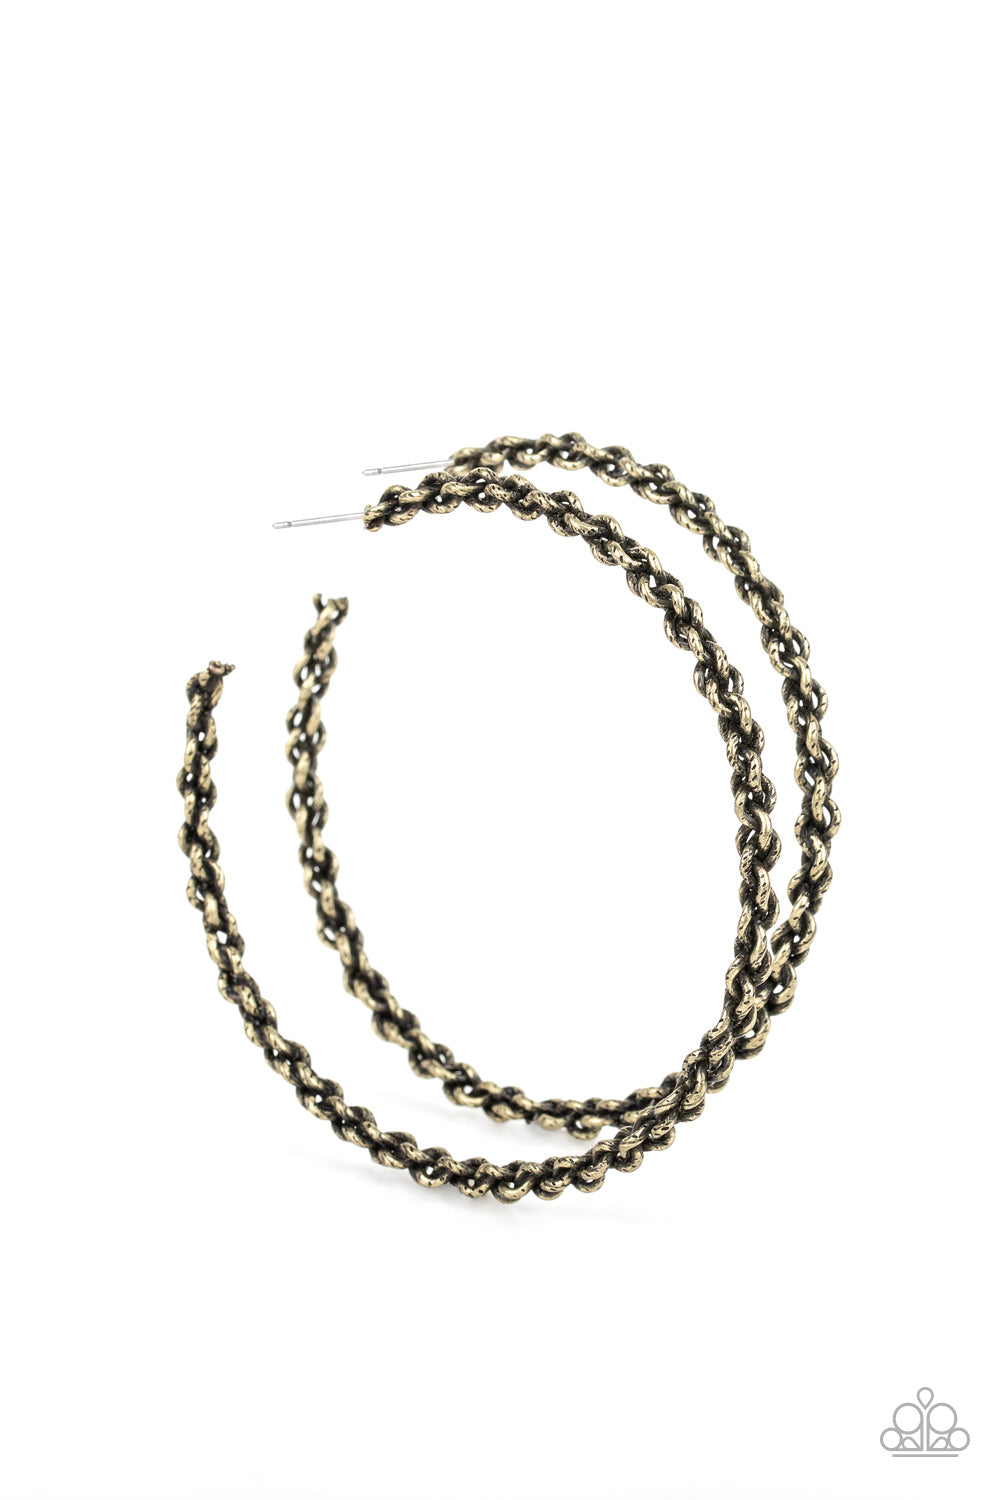 CHAINge Is Coming - Brass Item #E200 Brushed in an antiqued shimmer, glistening brass chain twists into an edgy hoop. Earring attaches to a standard post fitting. Hoop measures approximately 2 3/4" in diameter. All Paparazzi Accessories are lead free and nickel free!  Sold as one pair of hoop earrings.